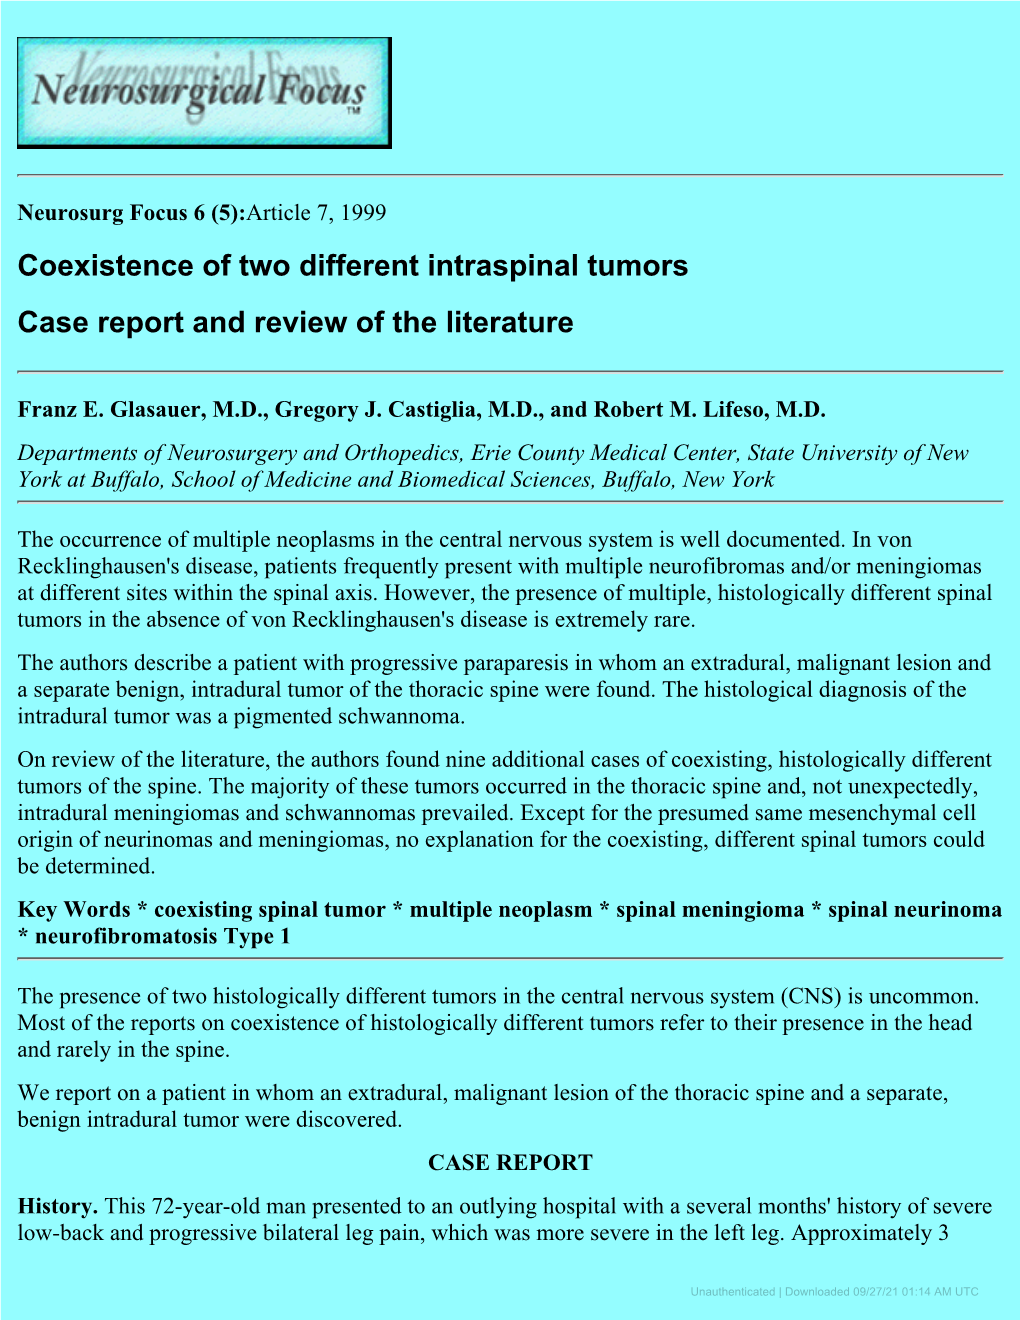 Coexistence of Two Different Intraspinal Tumors Case Report and Review of the Literature